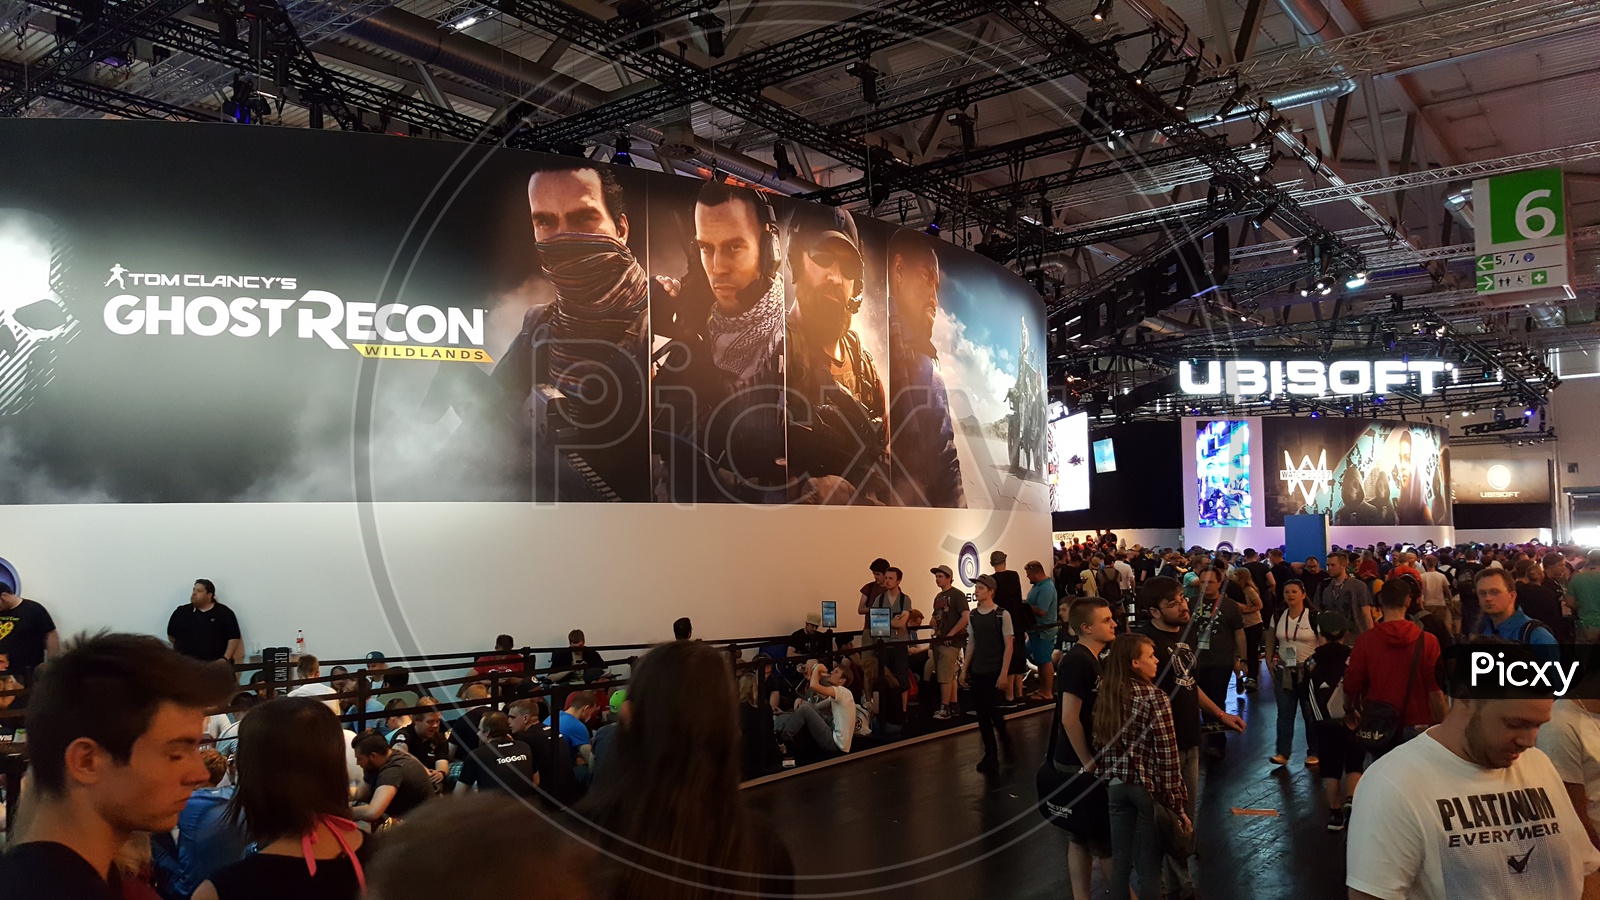 Ghost Recon Poster at Gamescom, Cologne